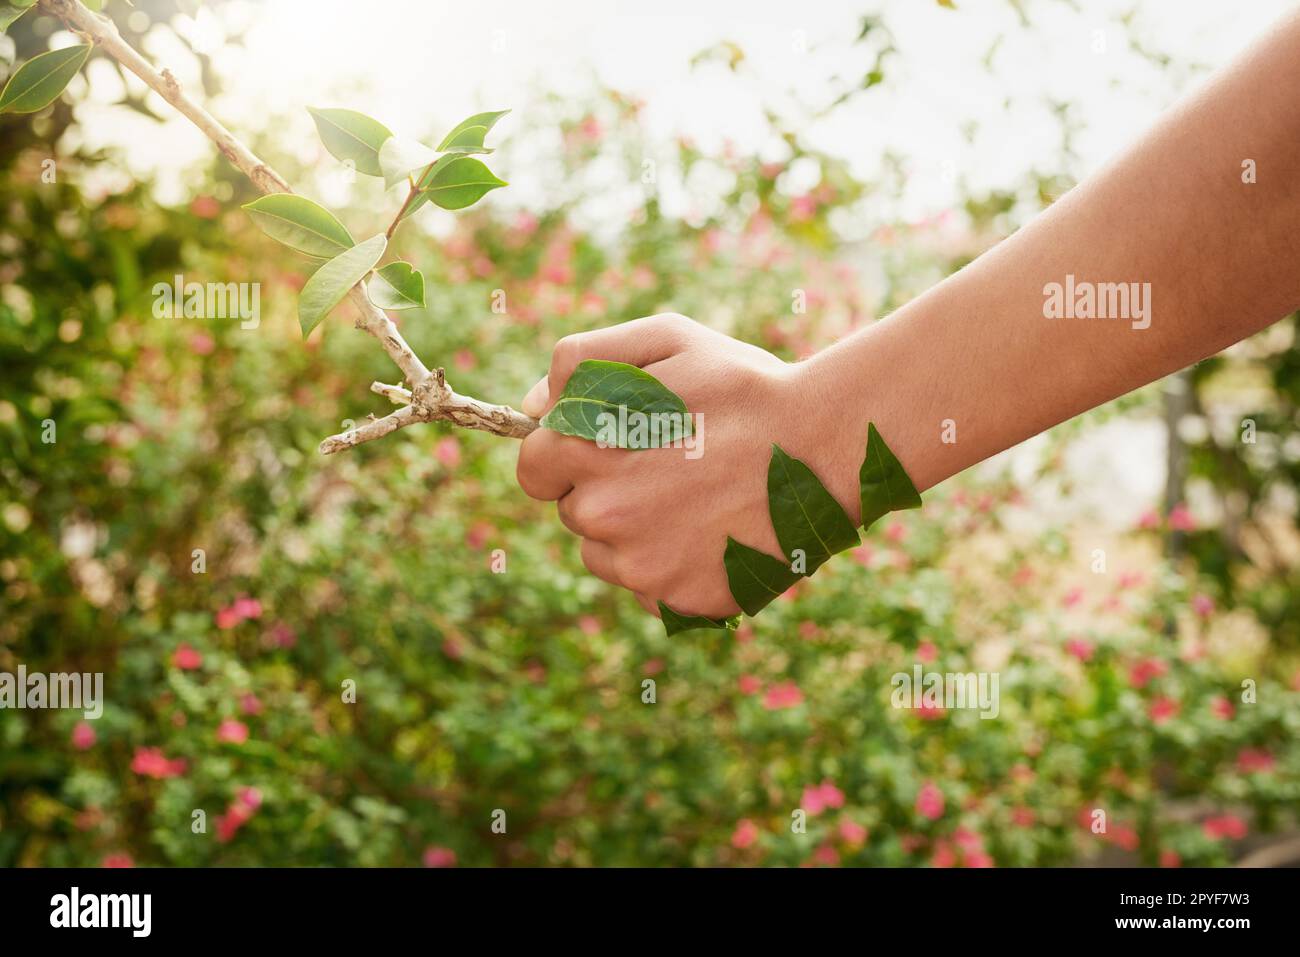 Walk hand in hand with mother nature. an unidentifiable young man shaking hands with a branch in his garden. Stock Photo